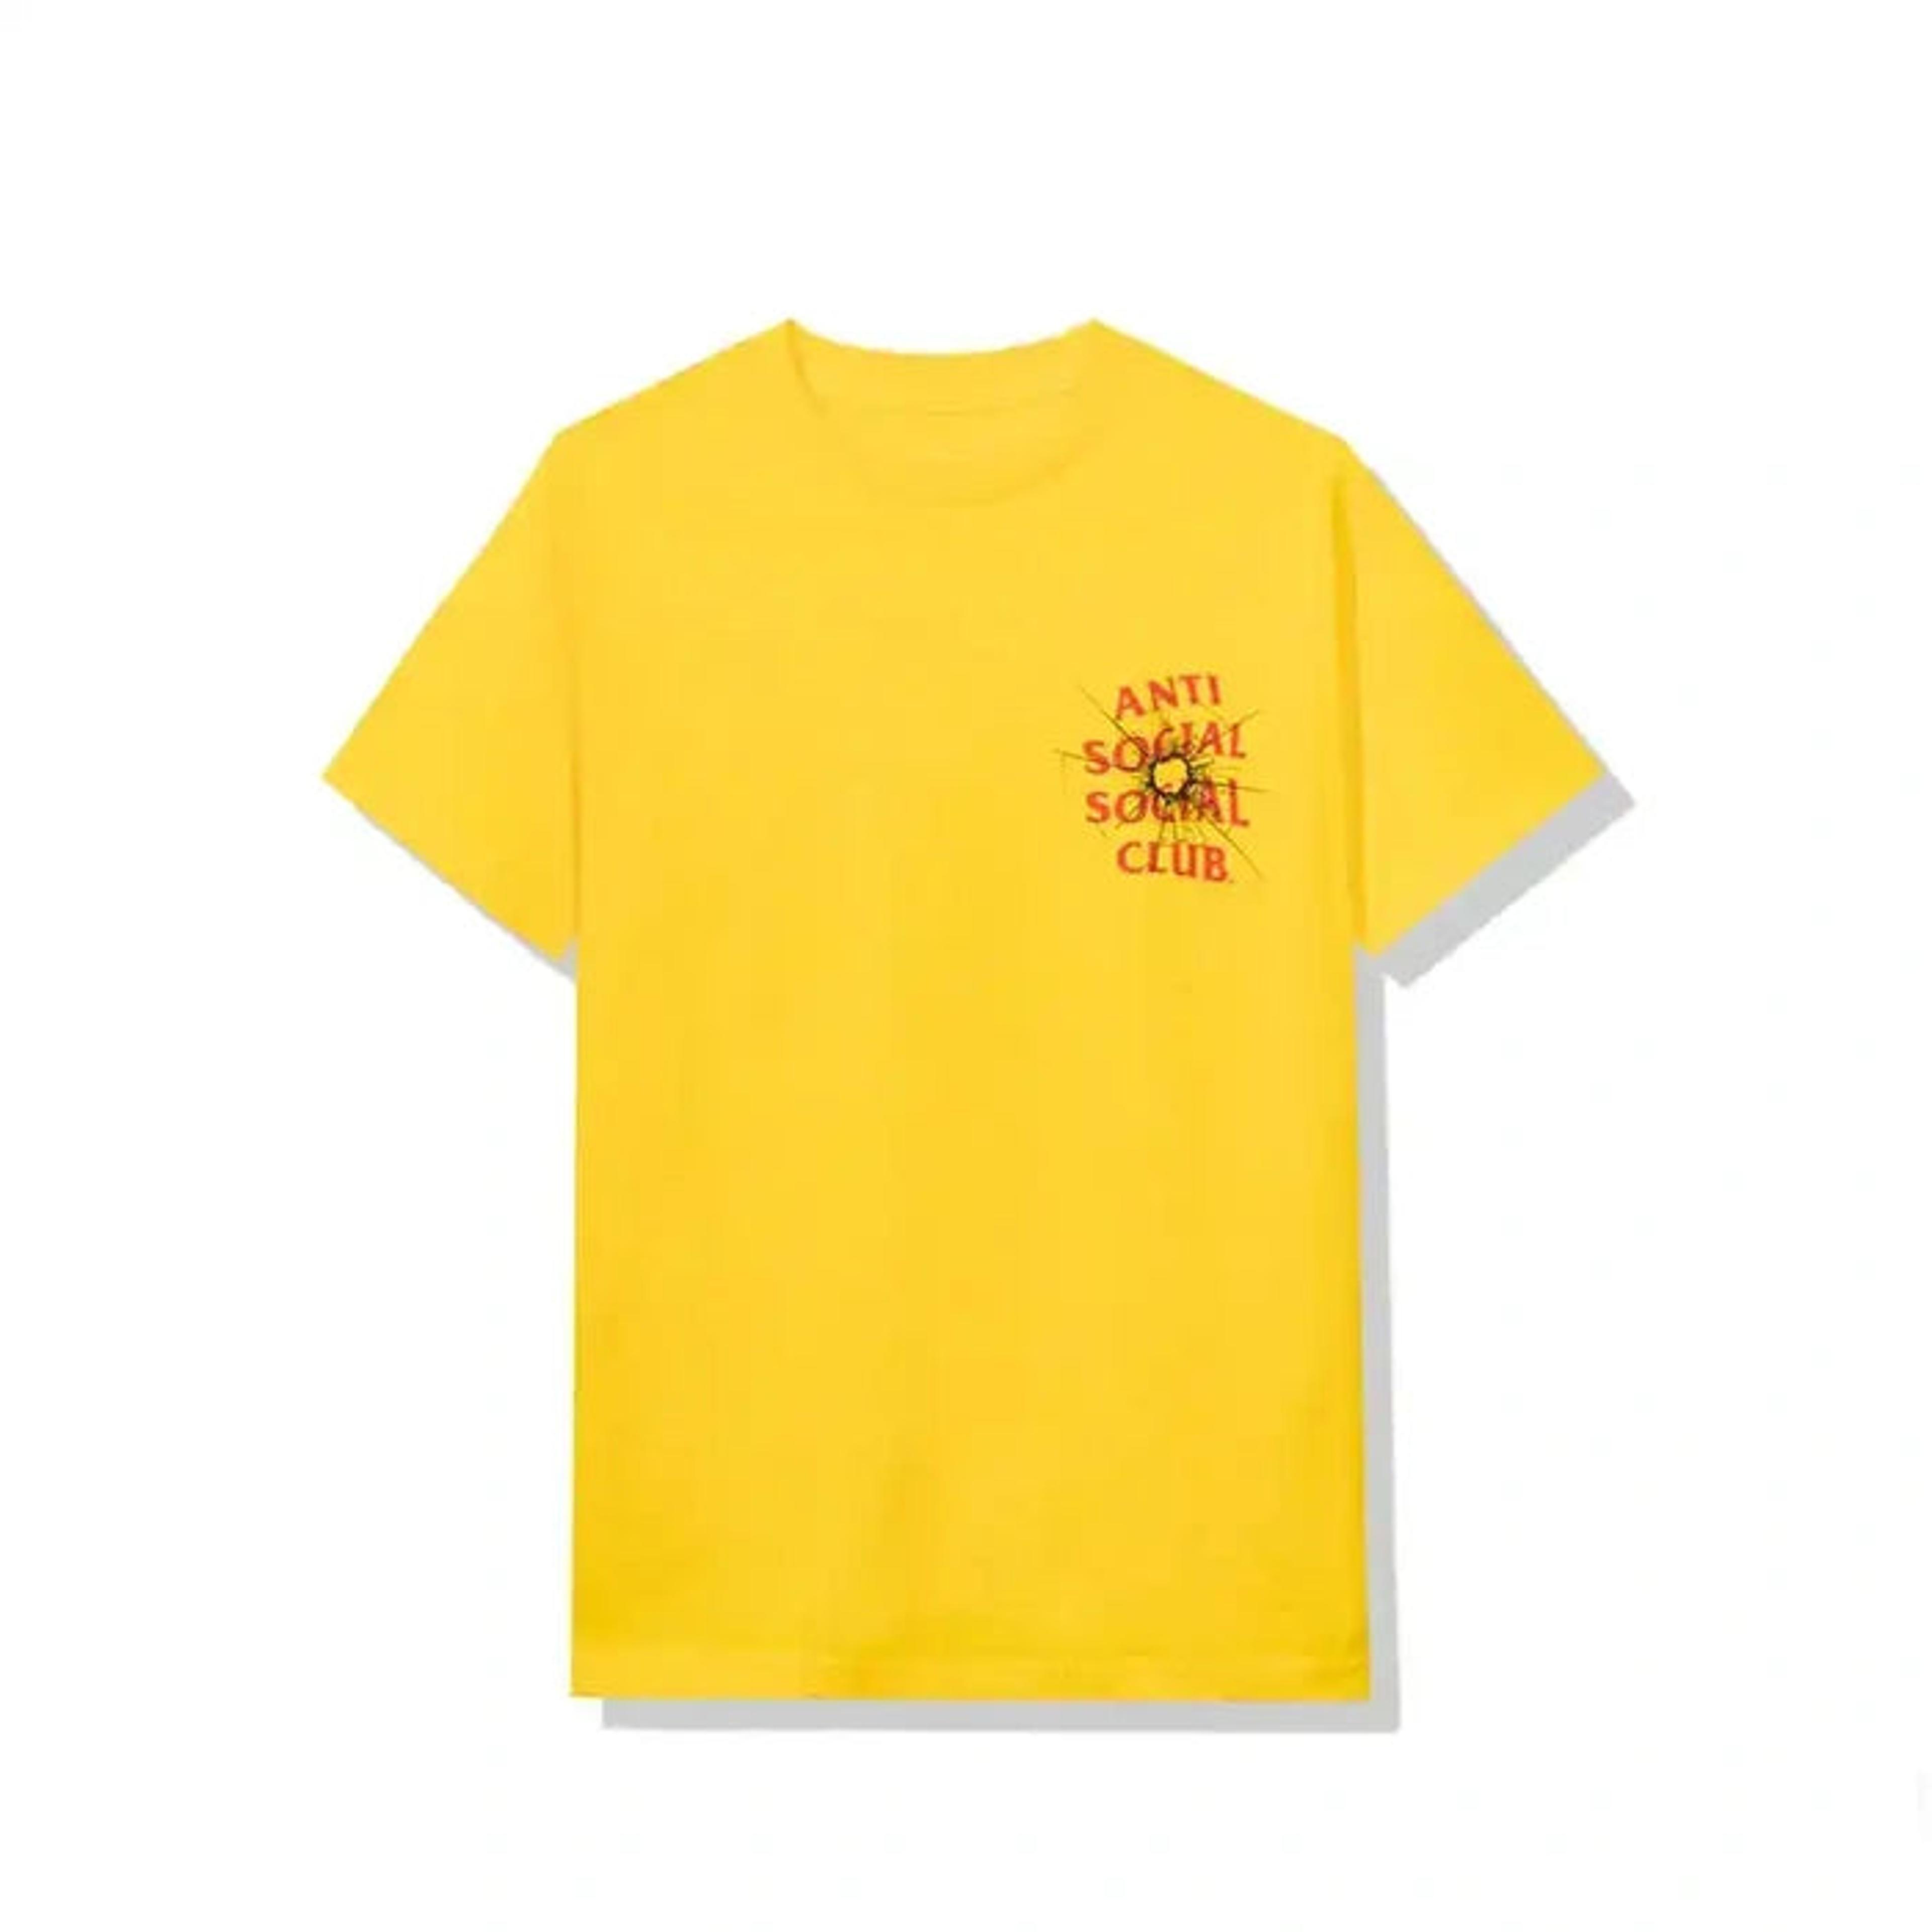 Alternate View 1 of Anti Social Social Club Theories Yellow Tee ASSC DS Brand New